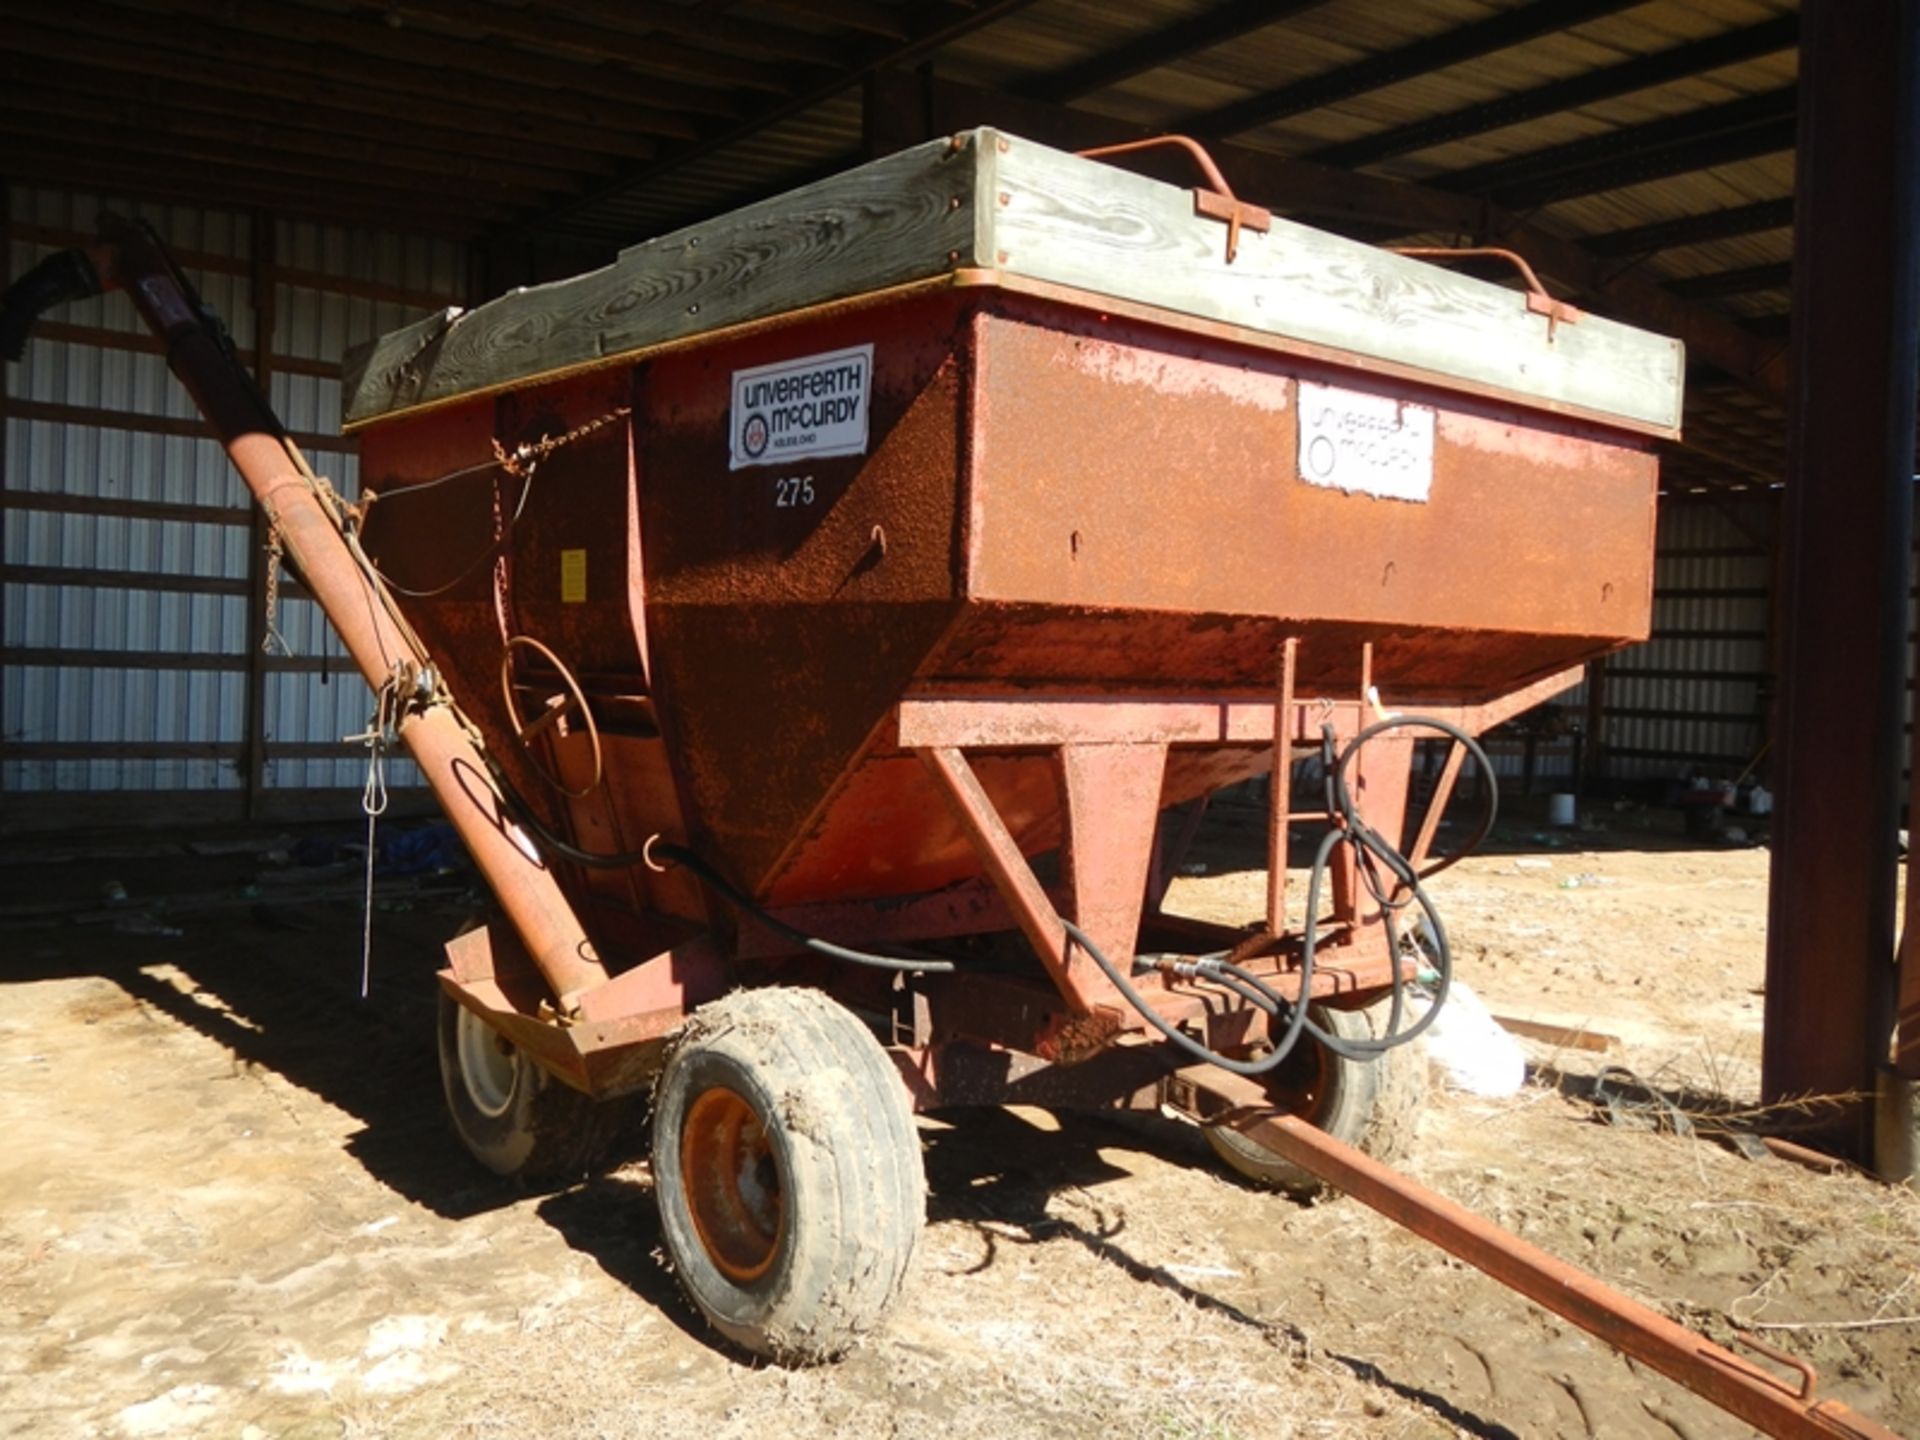 Unerferth 275 gravity flow grain cart with augor - Image 4 of 4